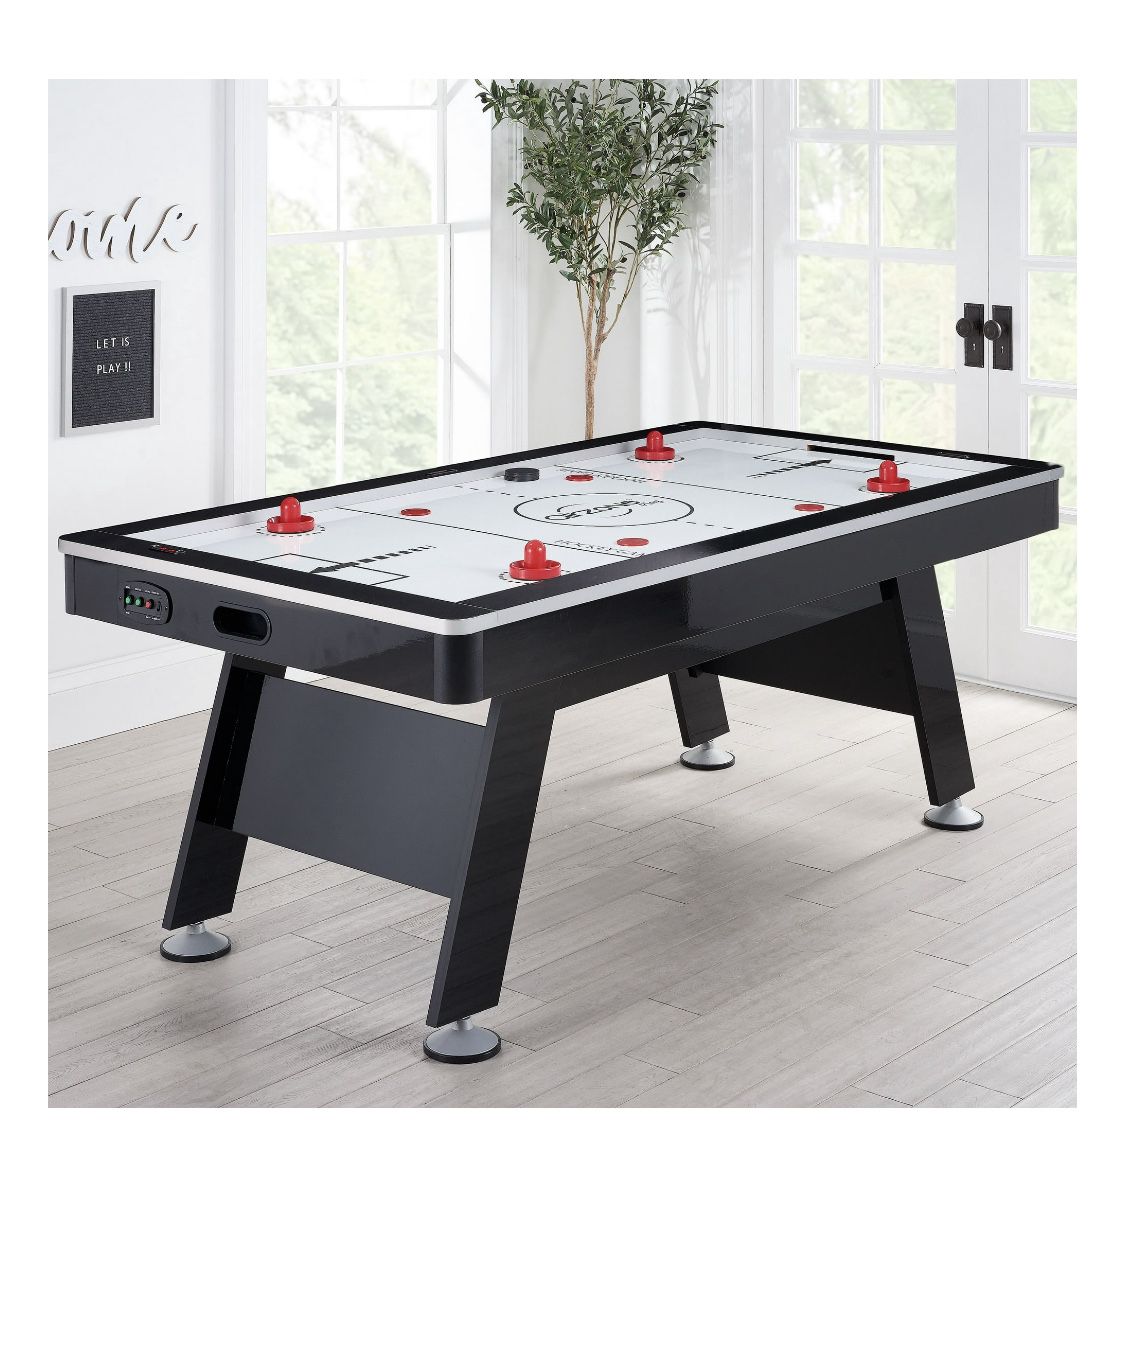 AirZone 80” Air Hockey Table With High End Blower